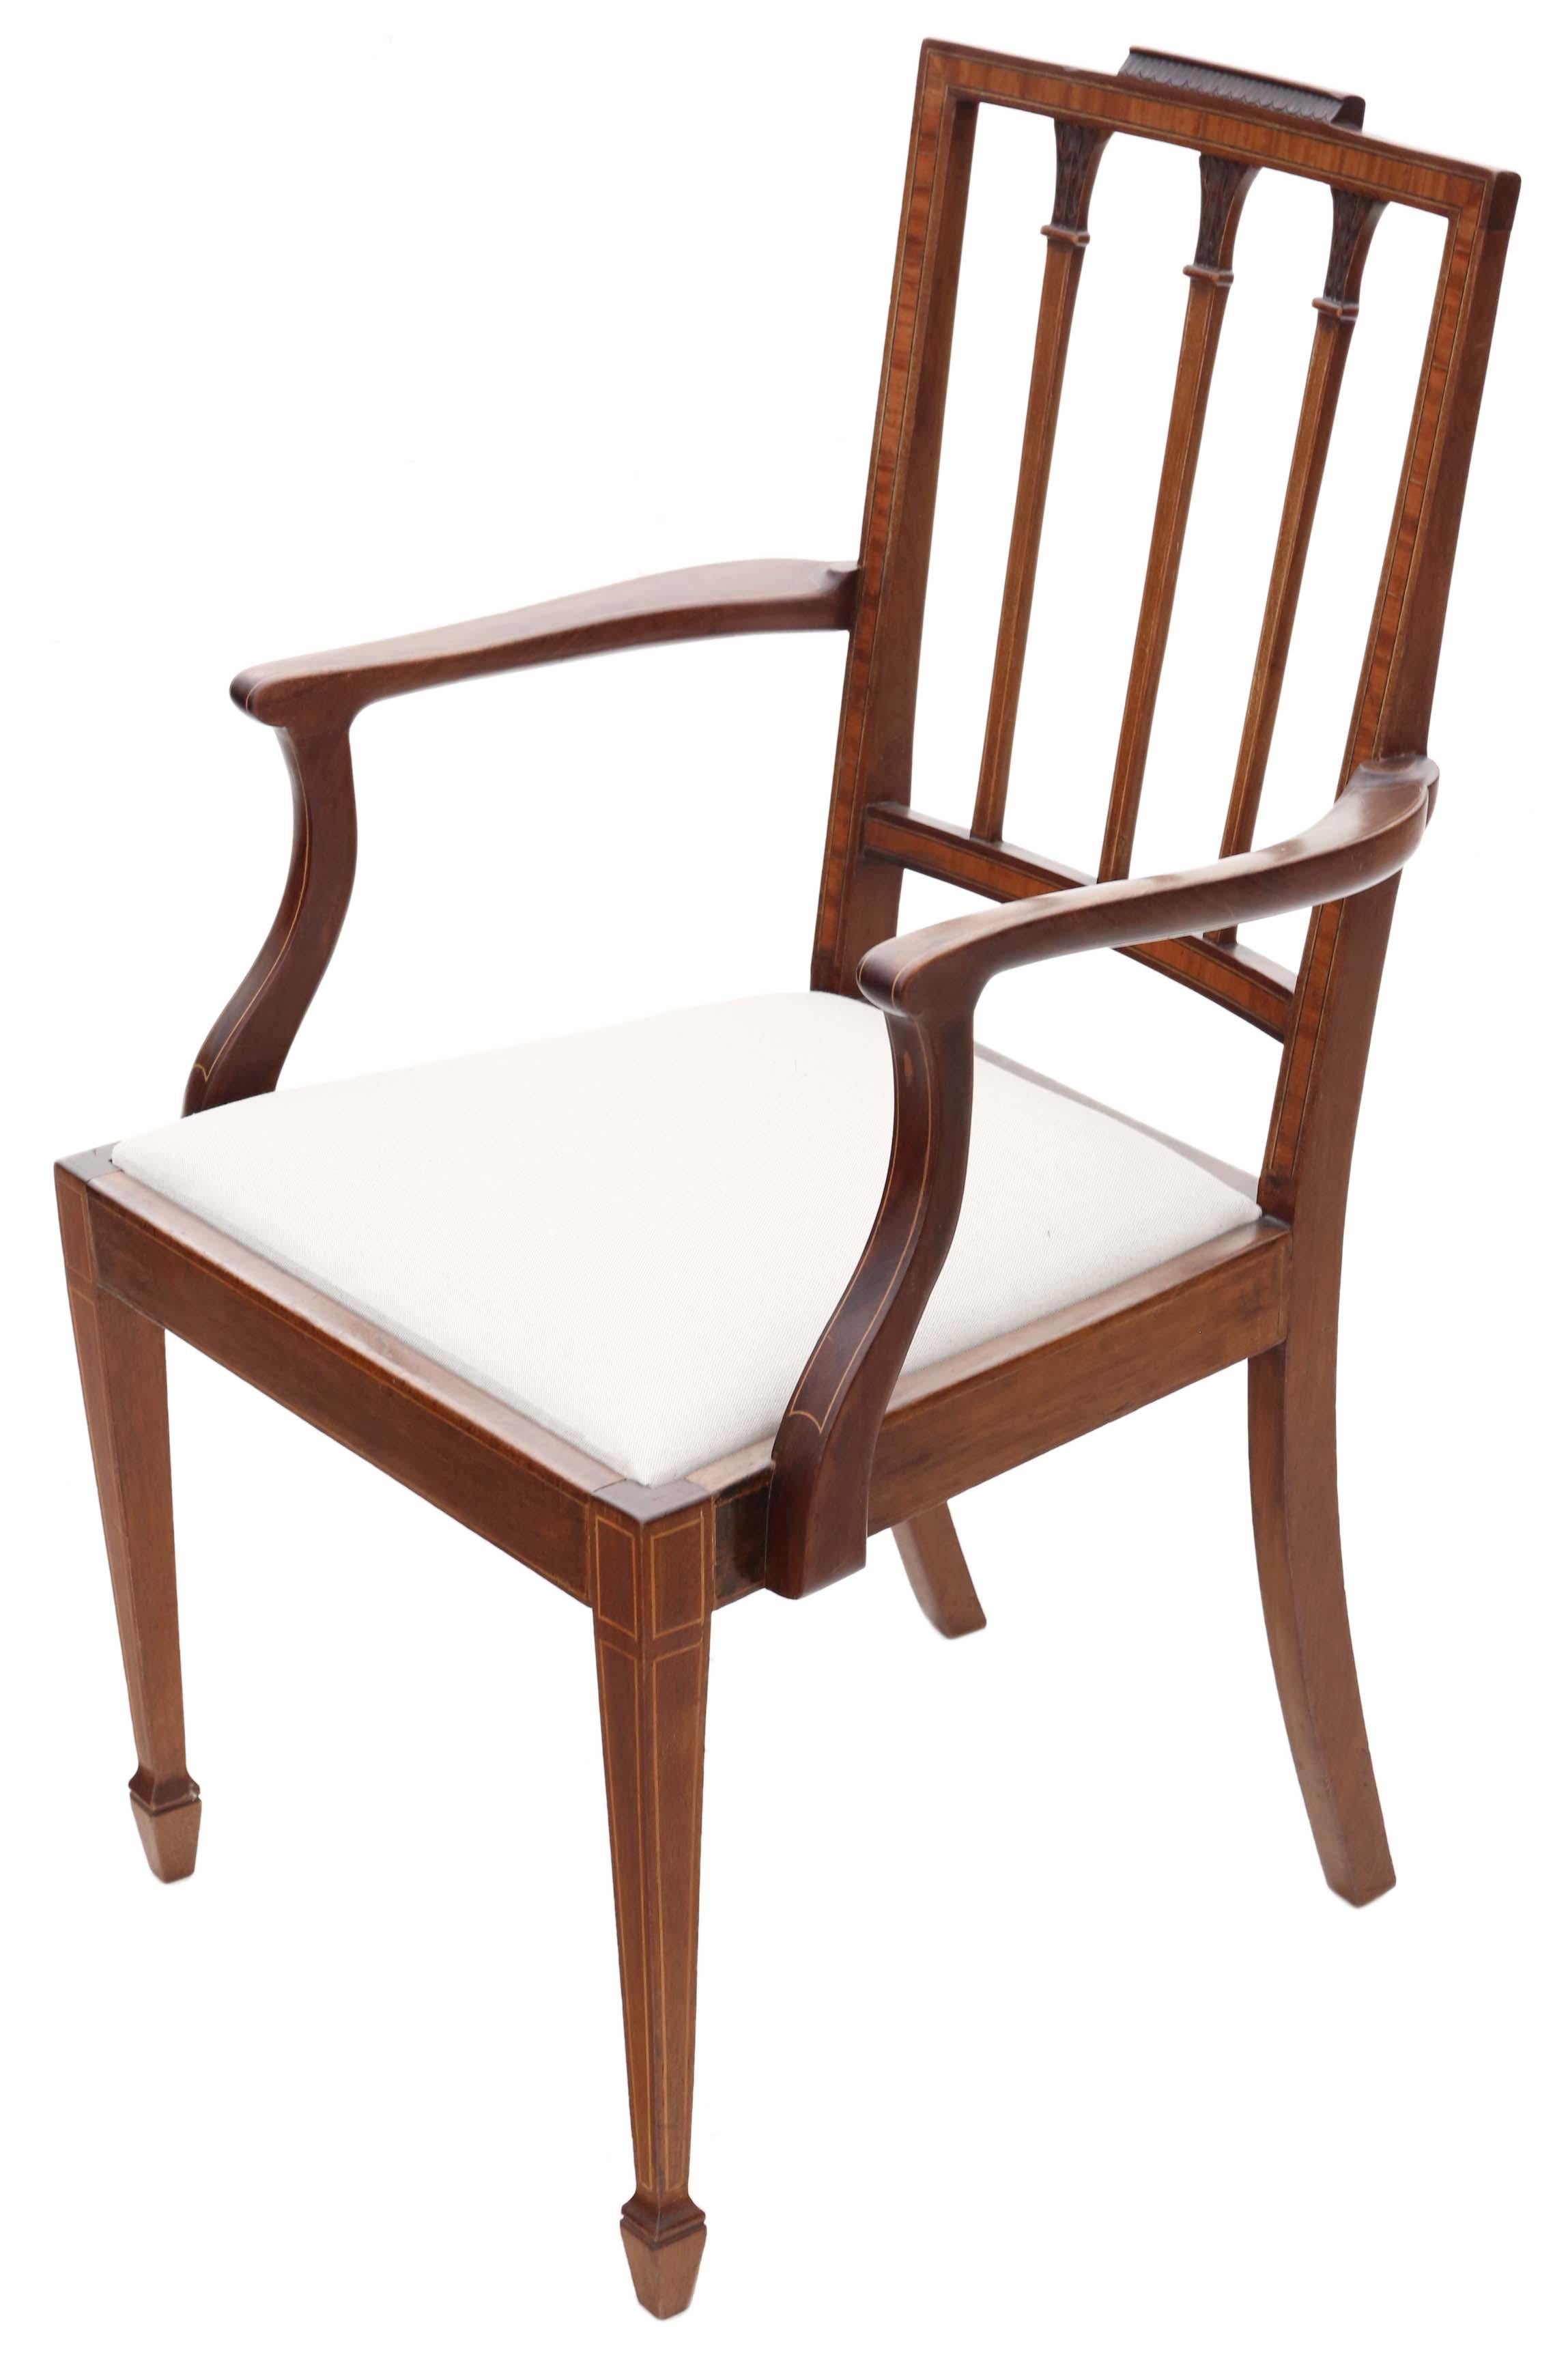 19th Century Georgian Revival Mahogany Dining Chairs: Set of 8 (6 + 2), Antique Quality, C190 For Sale